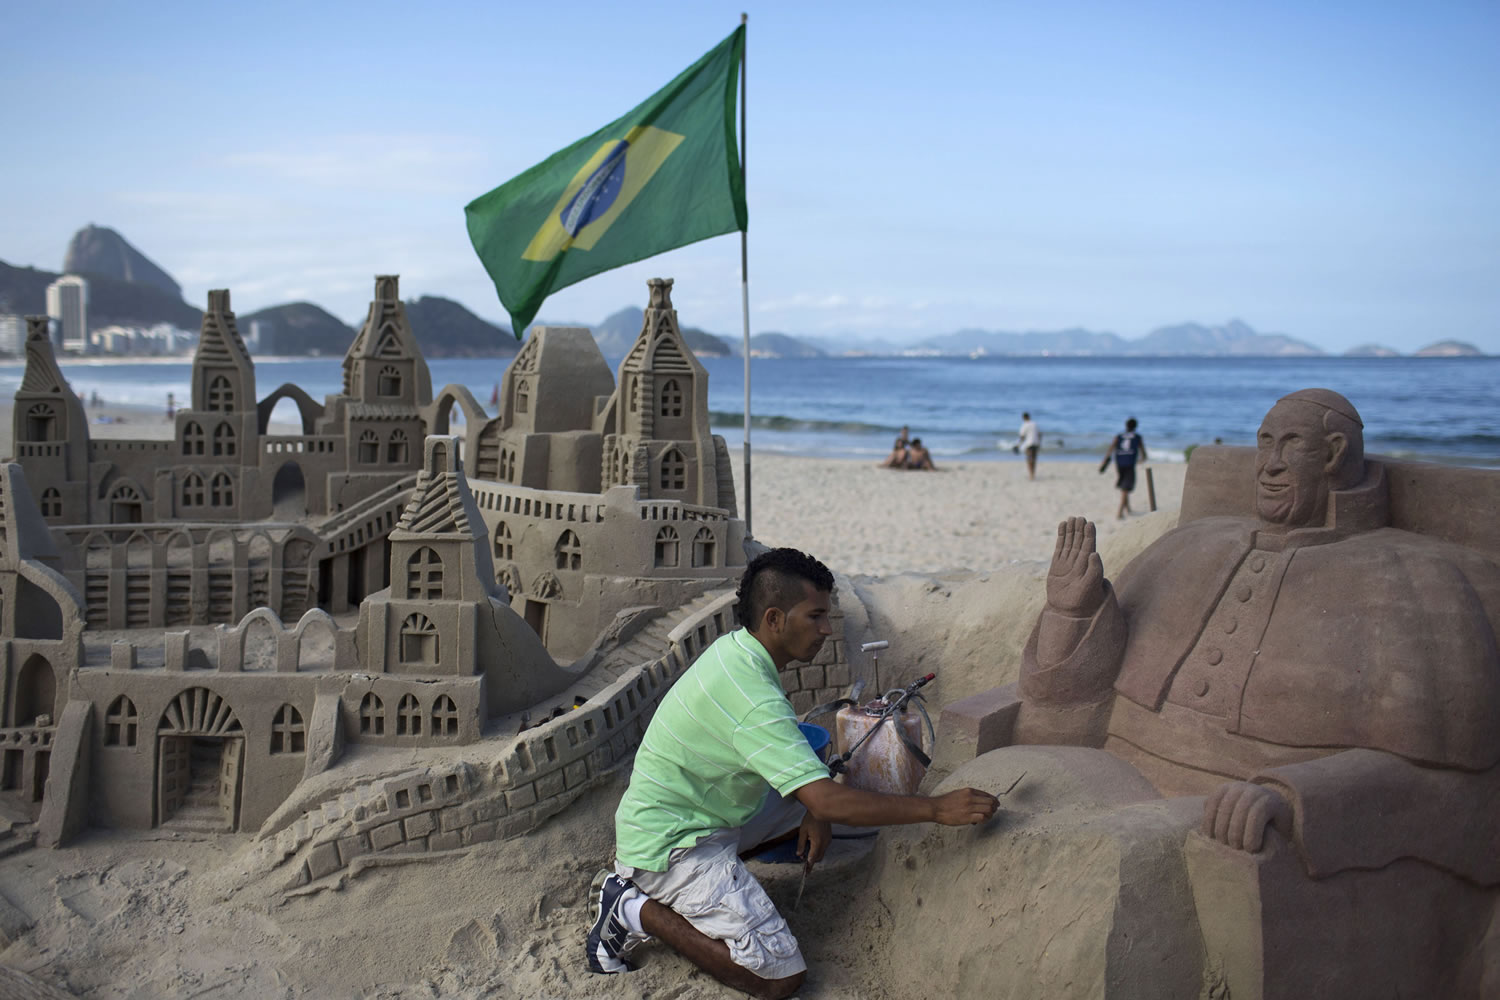 Artist Rogean Rodrigues builds a sand sculpture of Pope Francis in preparation for the pontiff's visit for World Youth Day events along Copacabana beach in Rio de Janeiro, Brazil, on Tuesday.